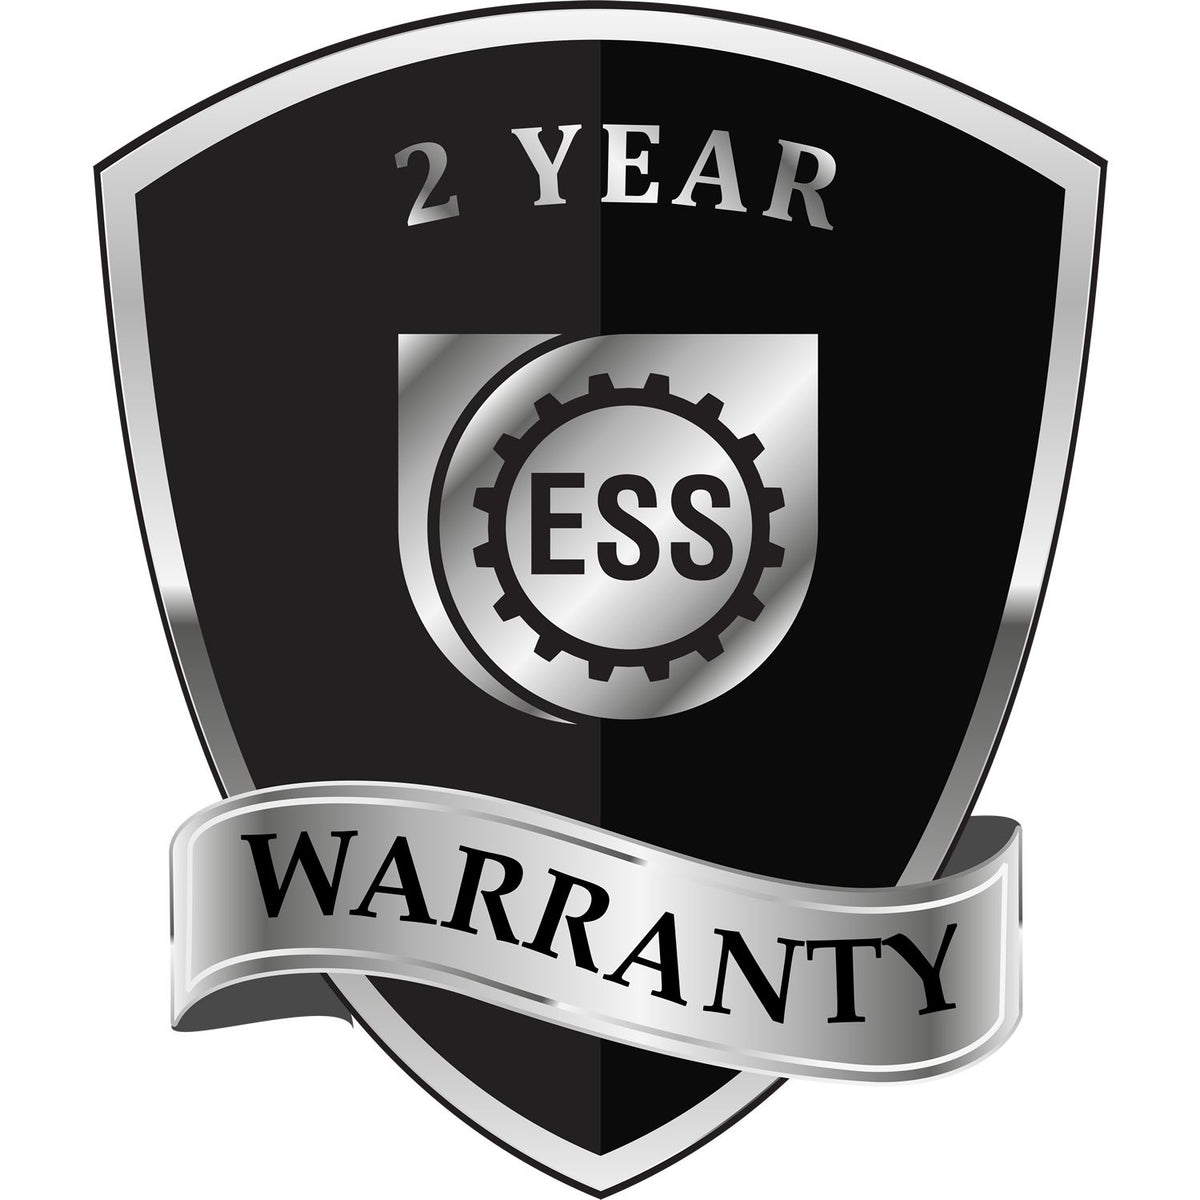 A black and silver badge or emblem showing warranty information for the Hybrid Guam Engineer Seal